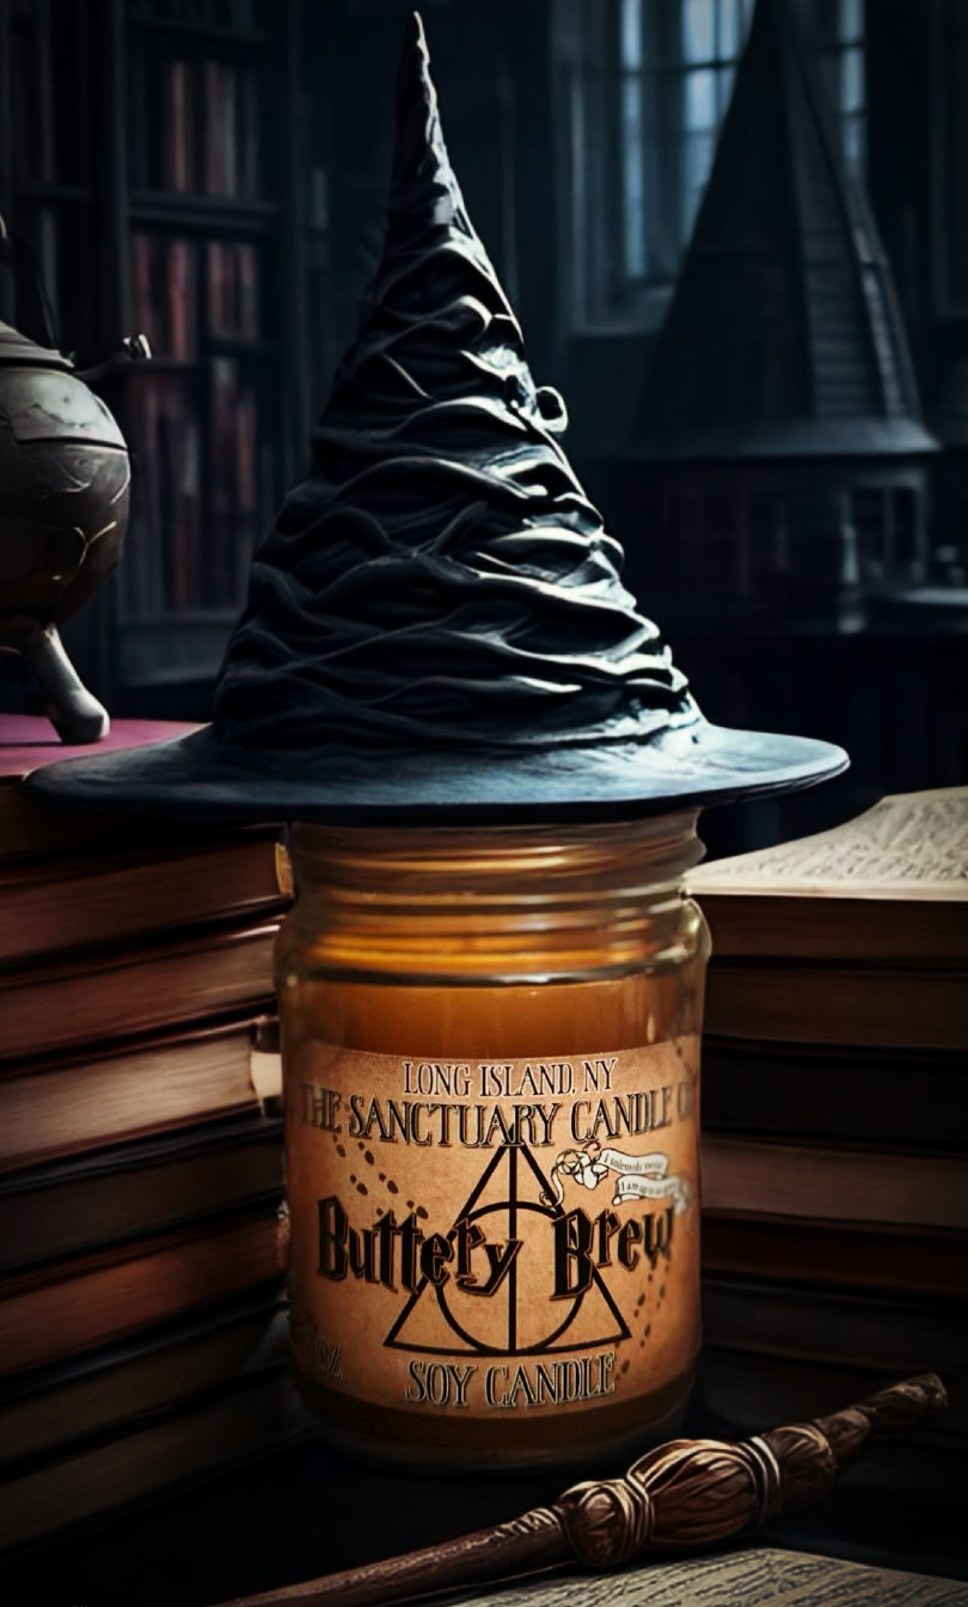 Buttery Brew Candle inspired by the Harry Potter books.